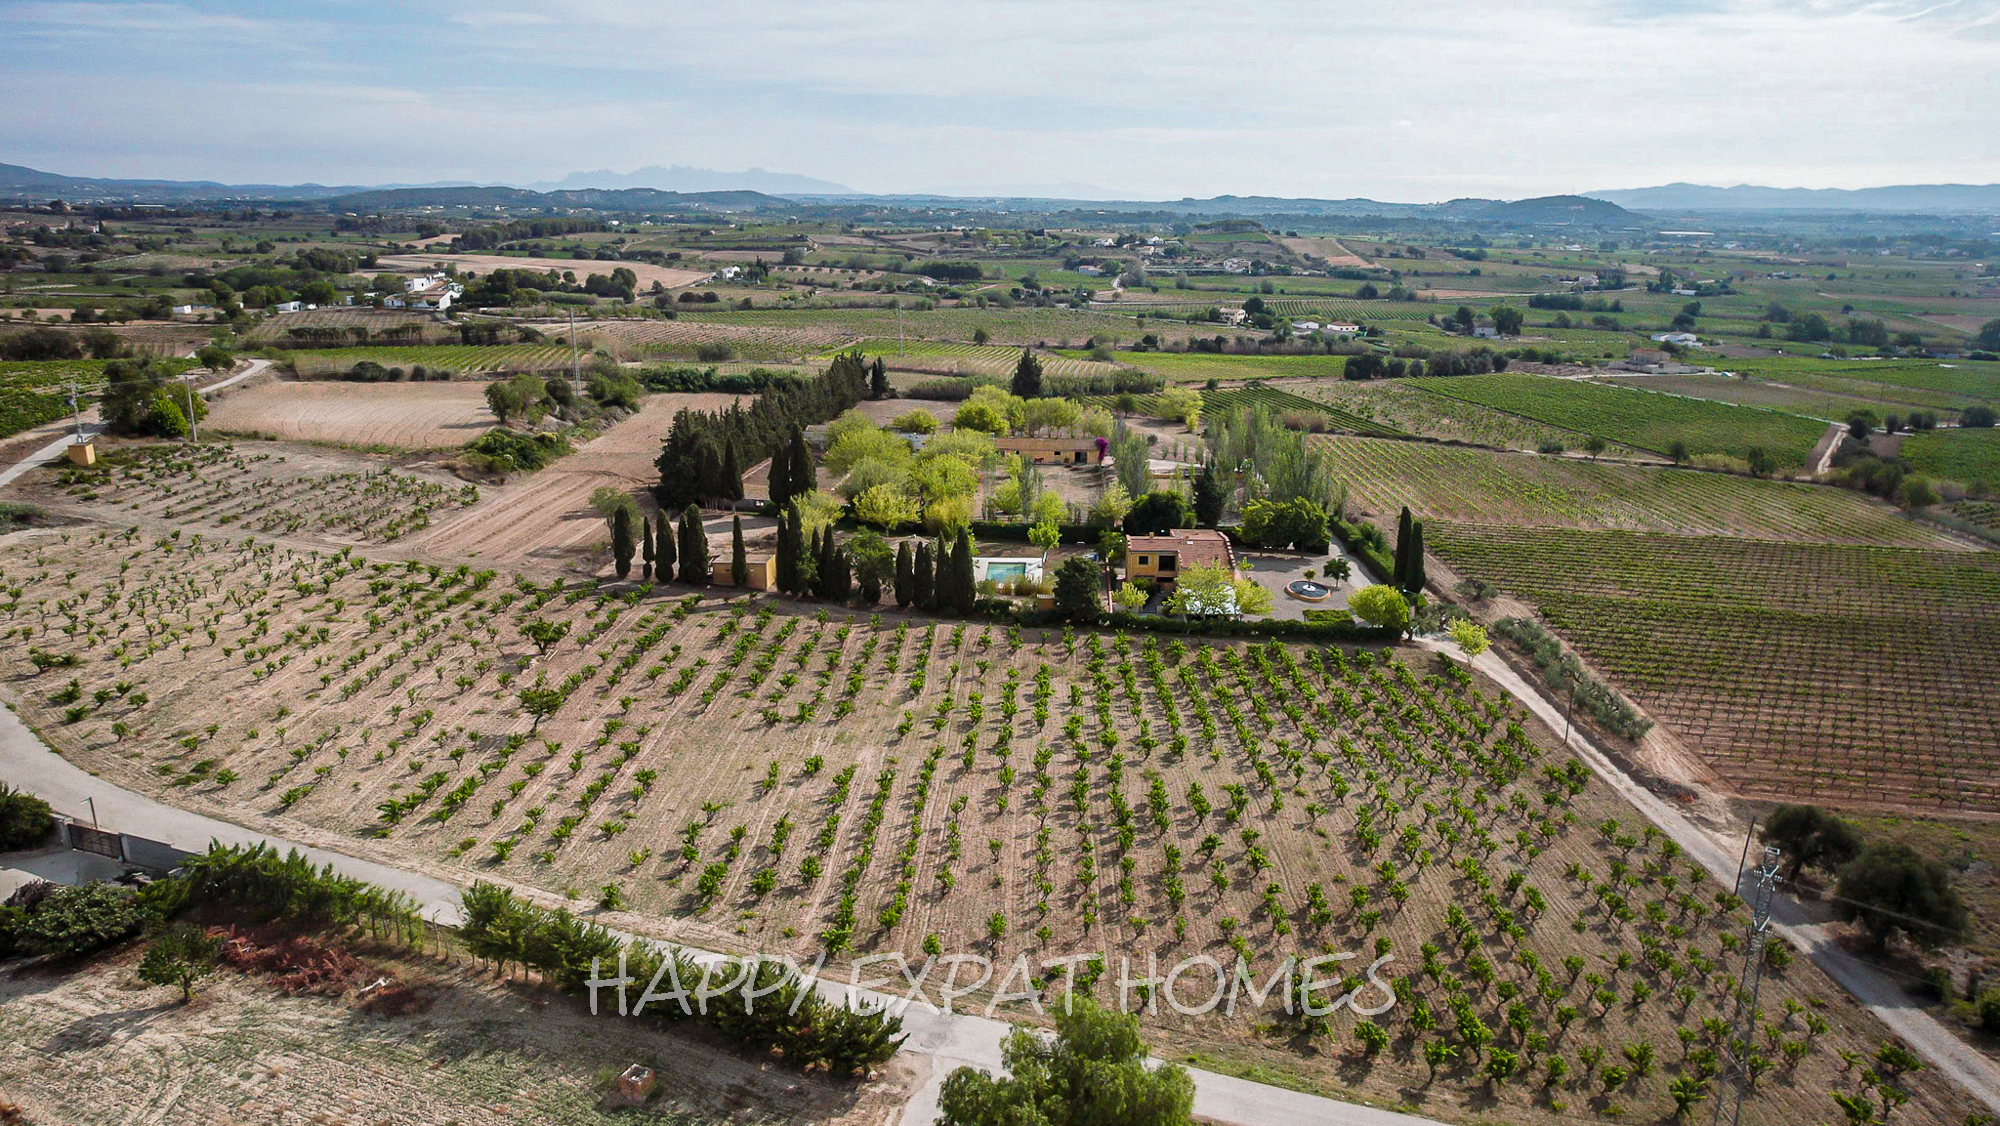 Exquisit country house surrounded by Catalan Vineyards